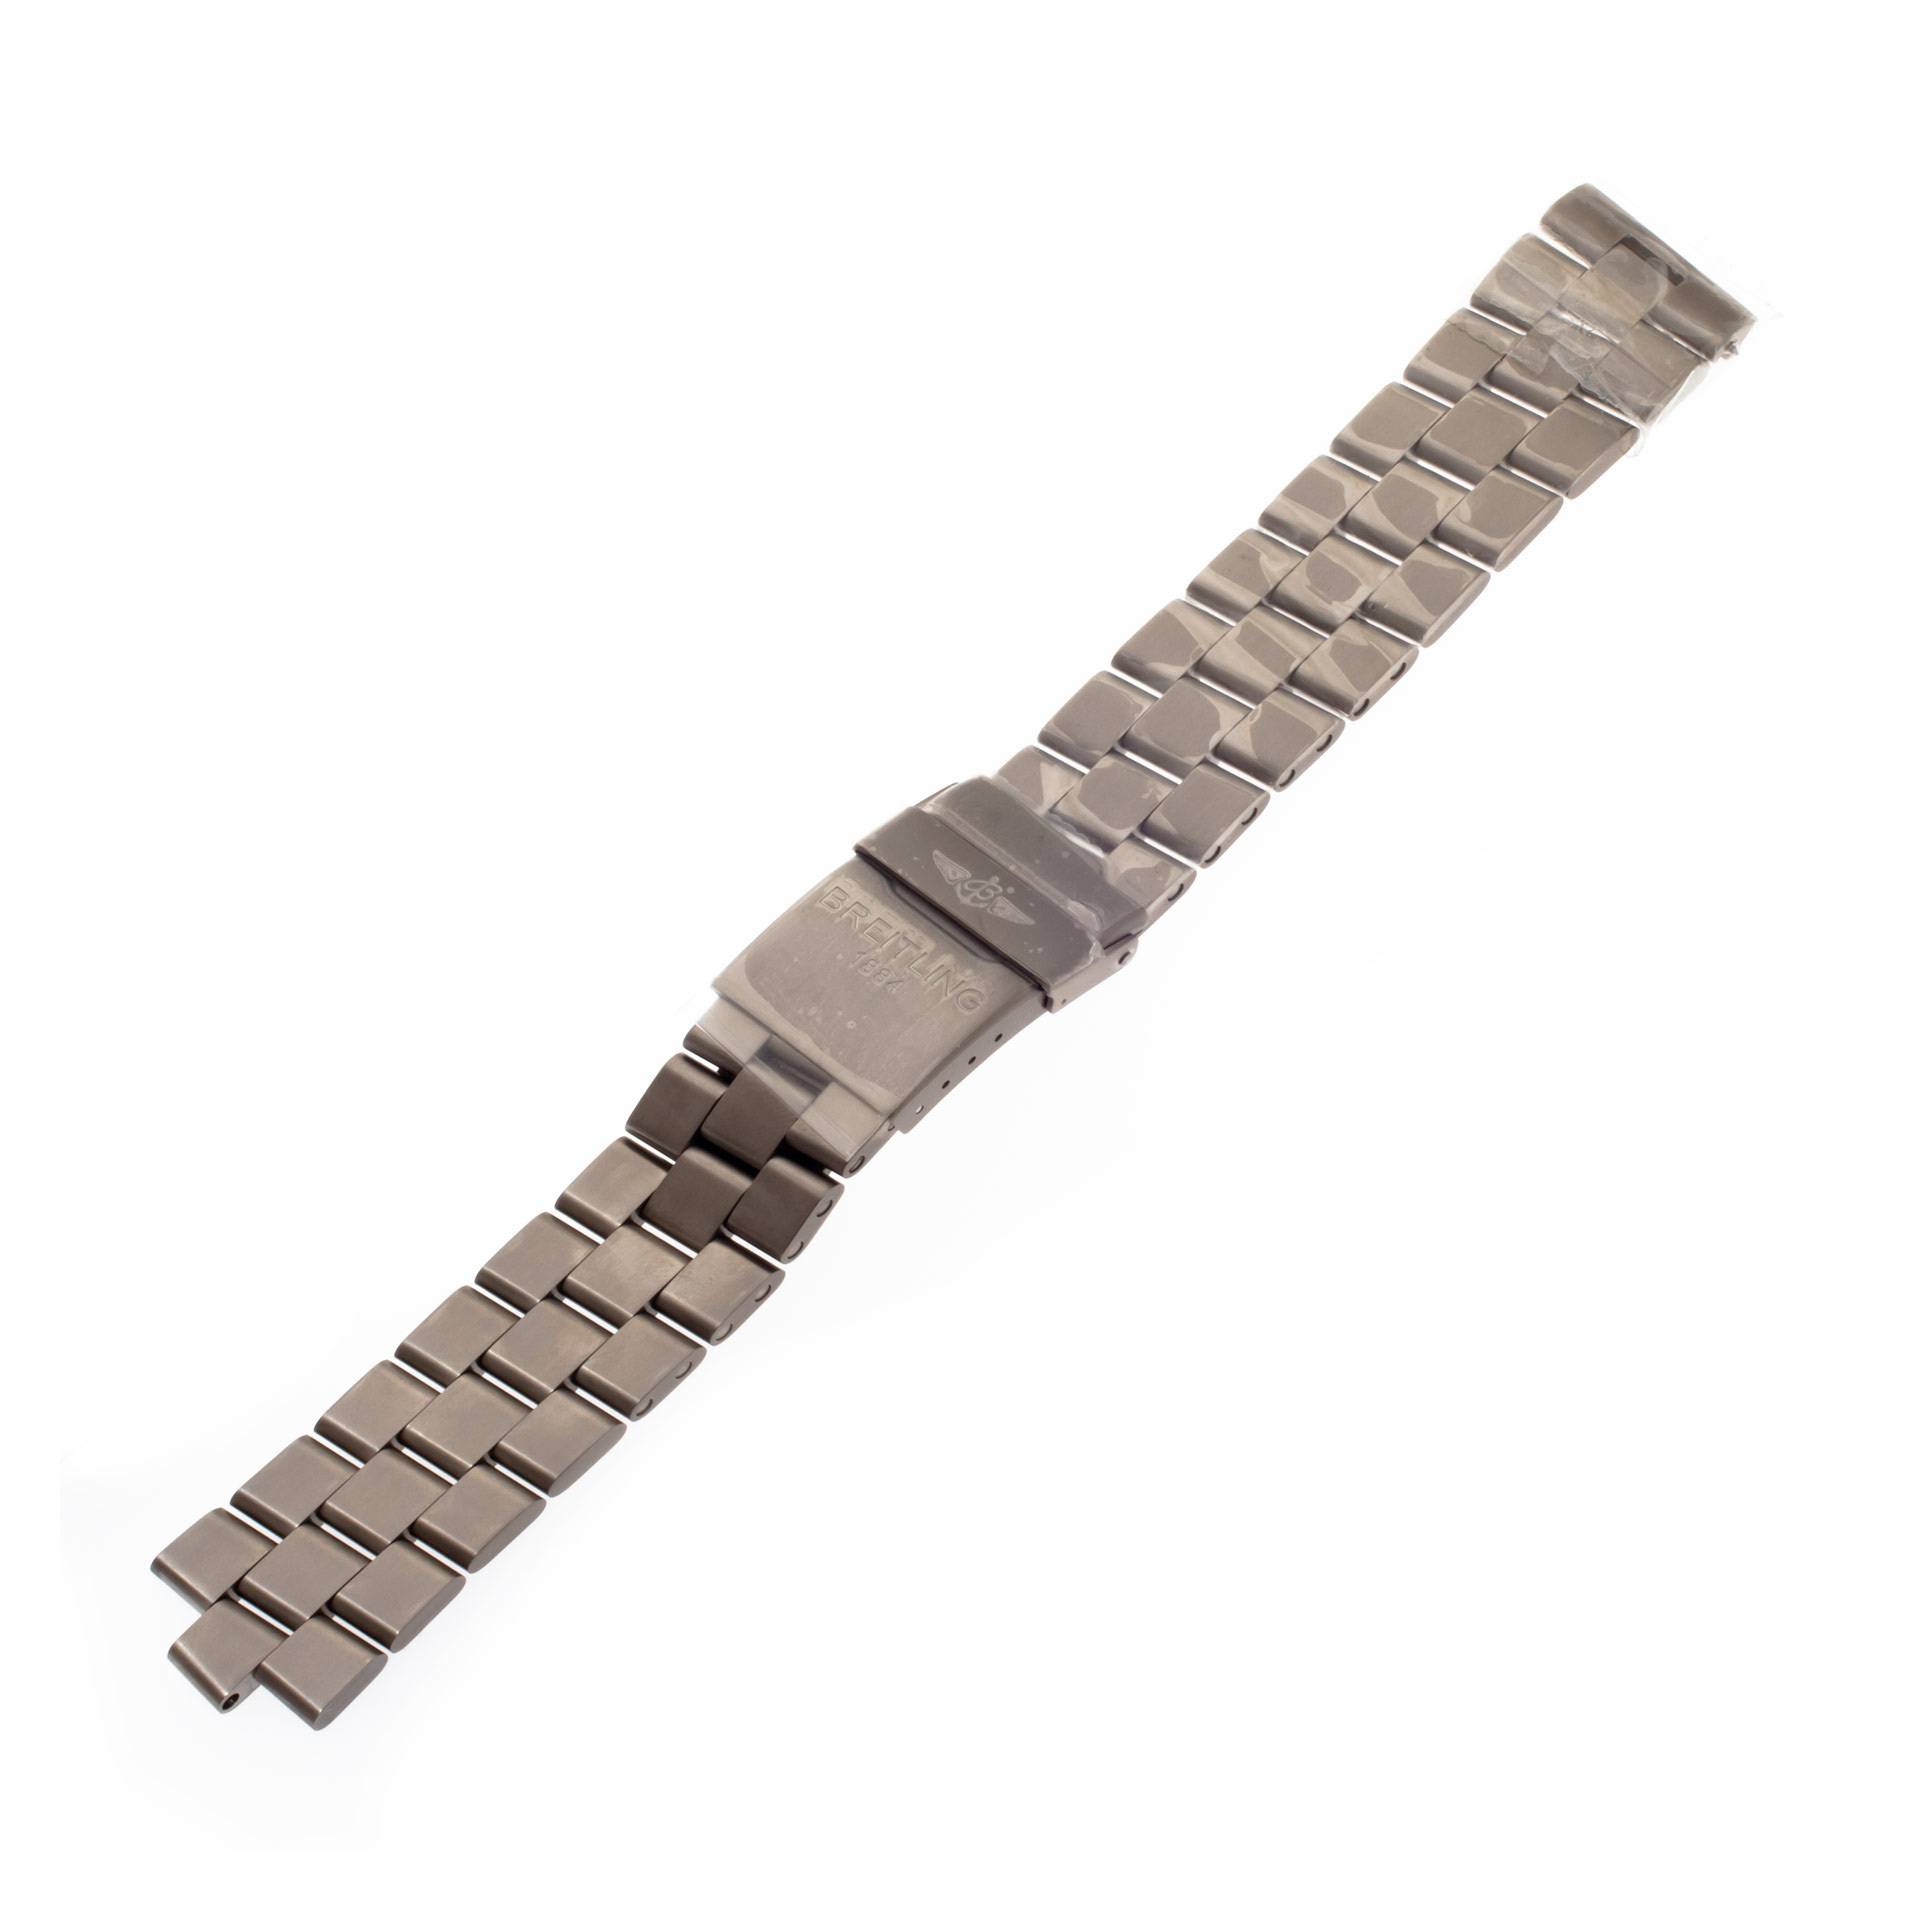 Breitling Aerospace Avantage titanium band with deployant clasp and extra link (22mm)